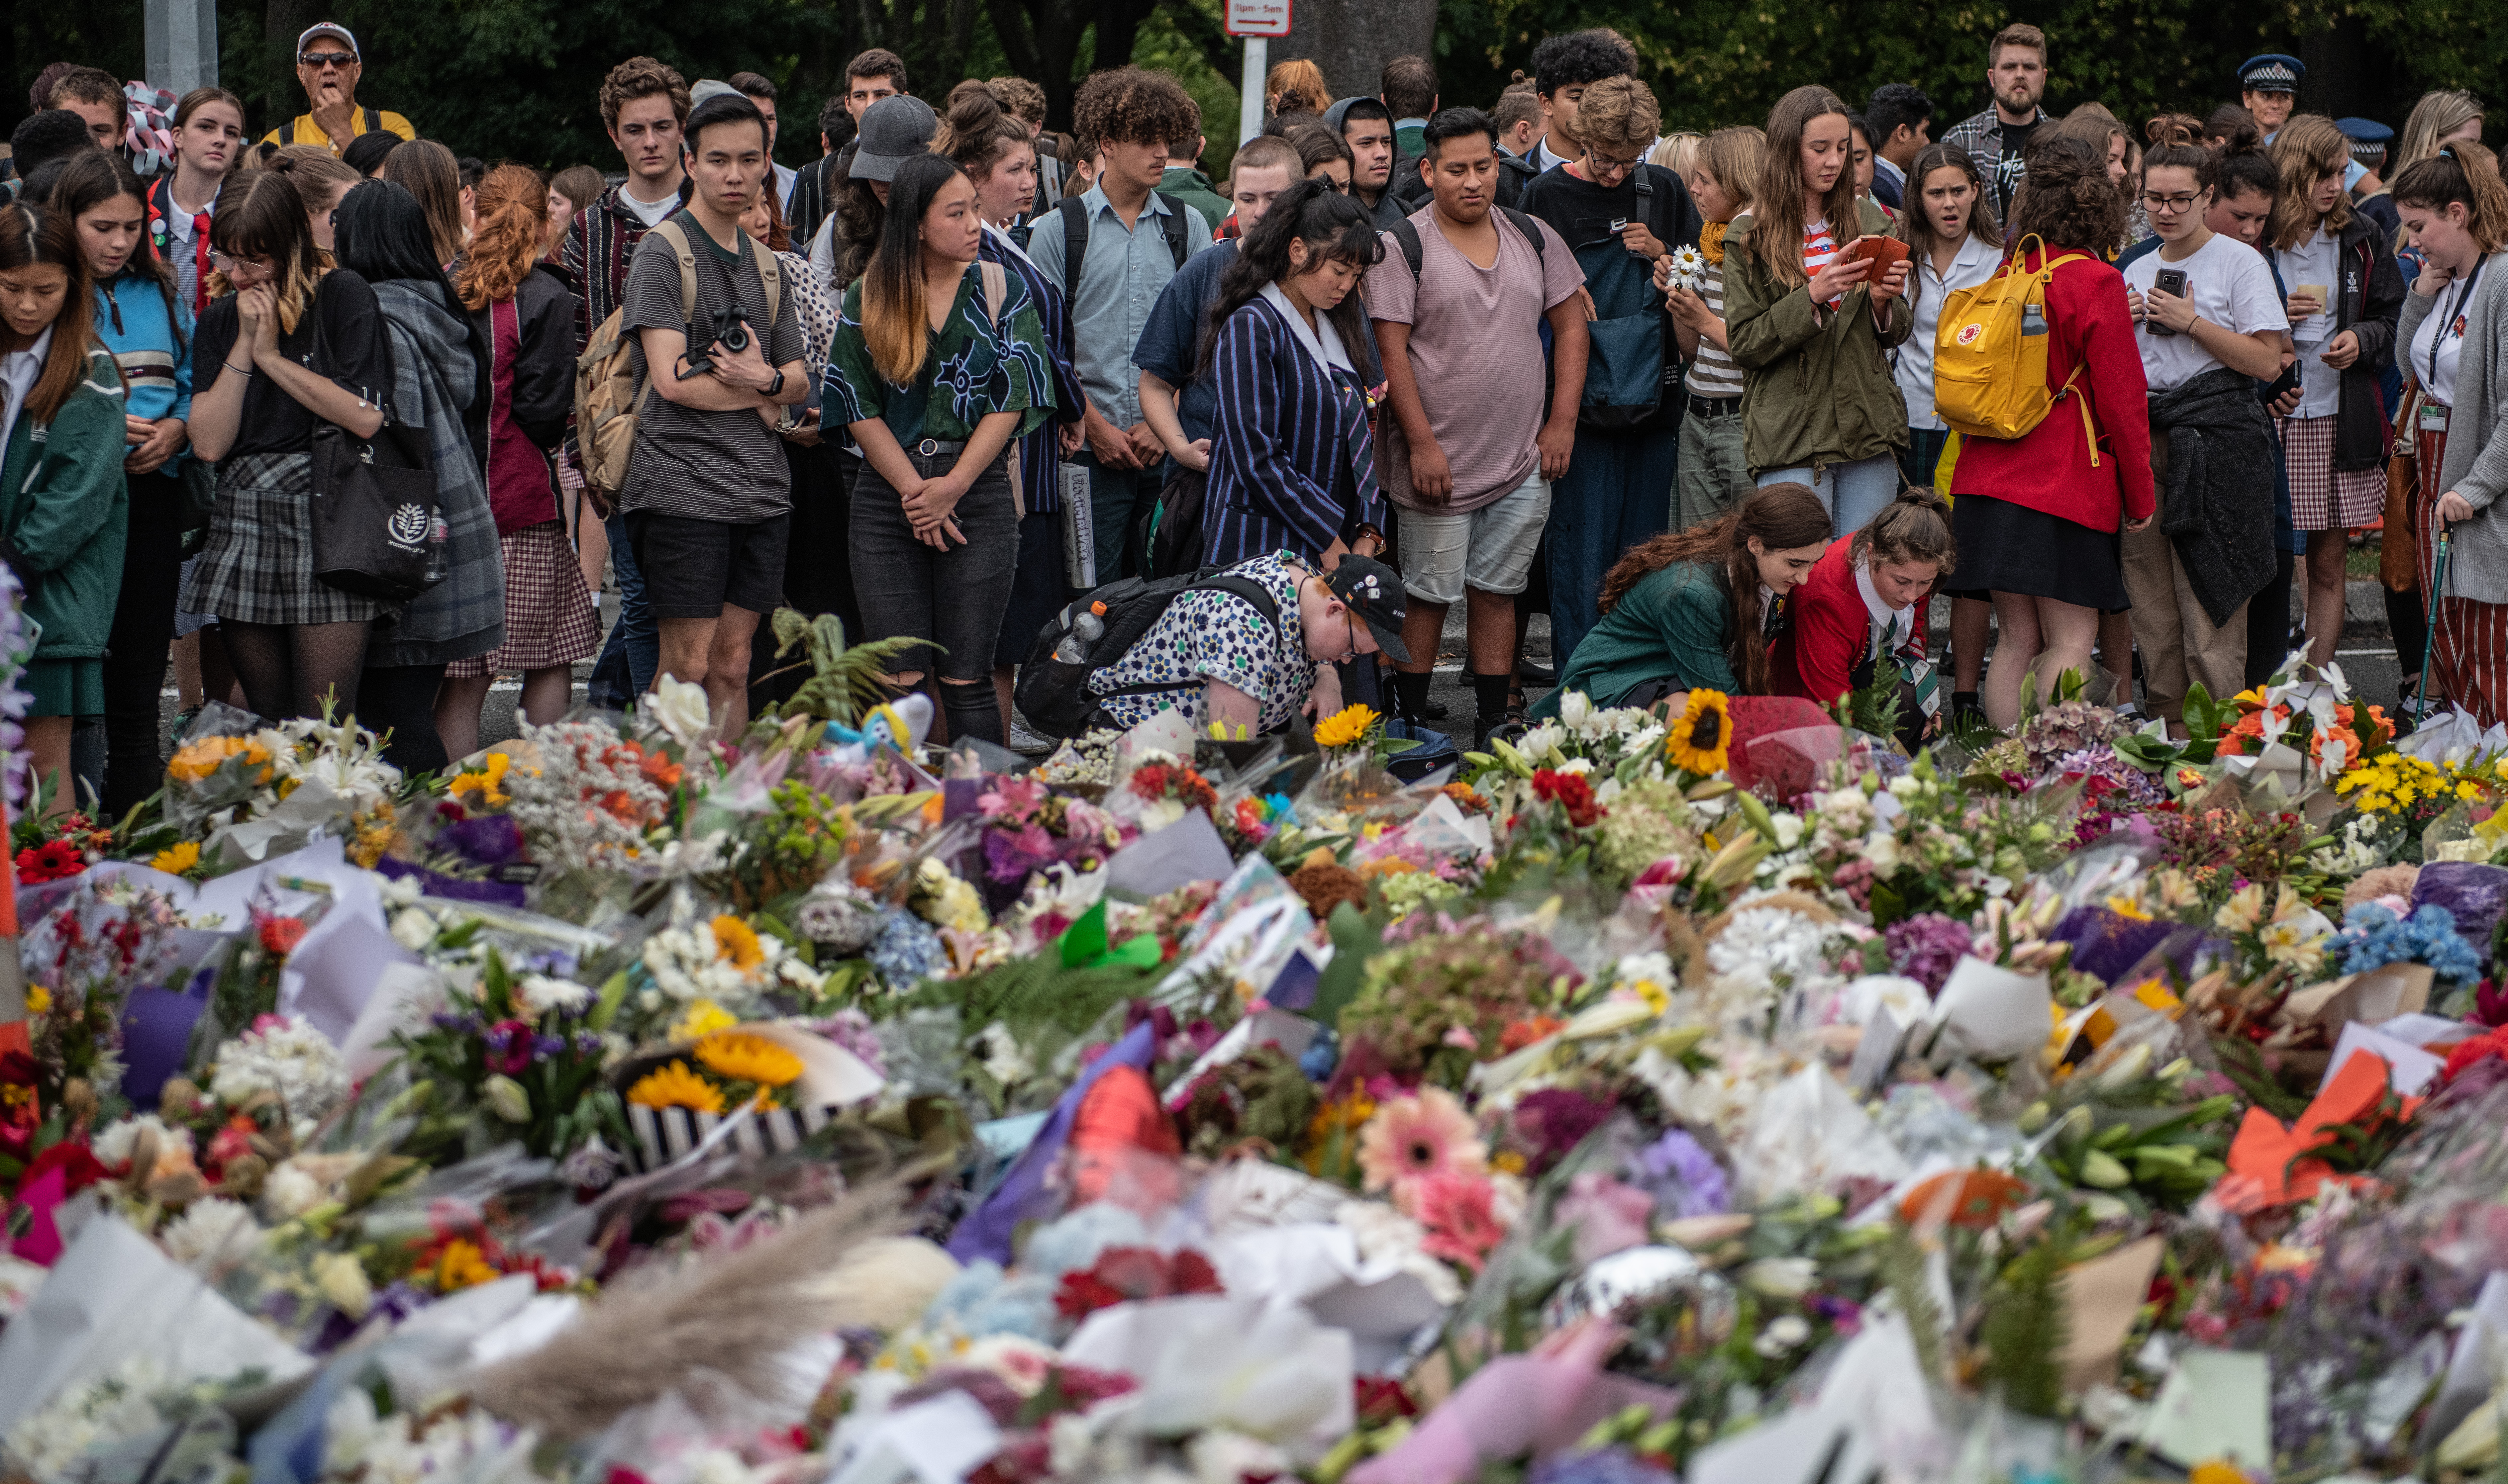 Schoolchildren and other well-wishers view flowers and tributes near Al Noor mosque on March 18, 2019 in Christchurch, New Zealand. (Photo by Carl Court/Getty Images)